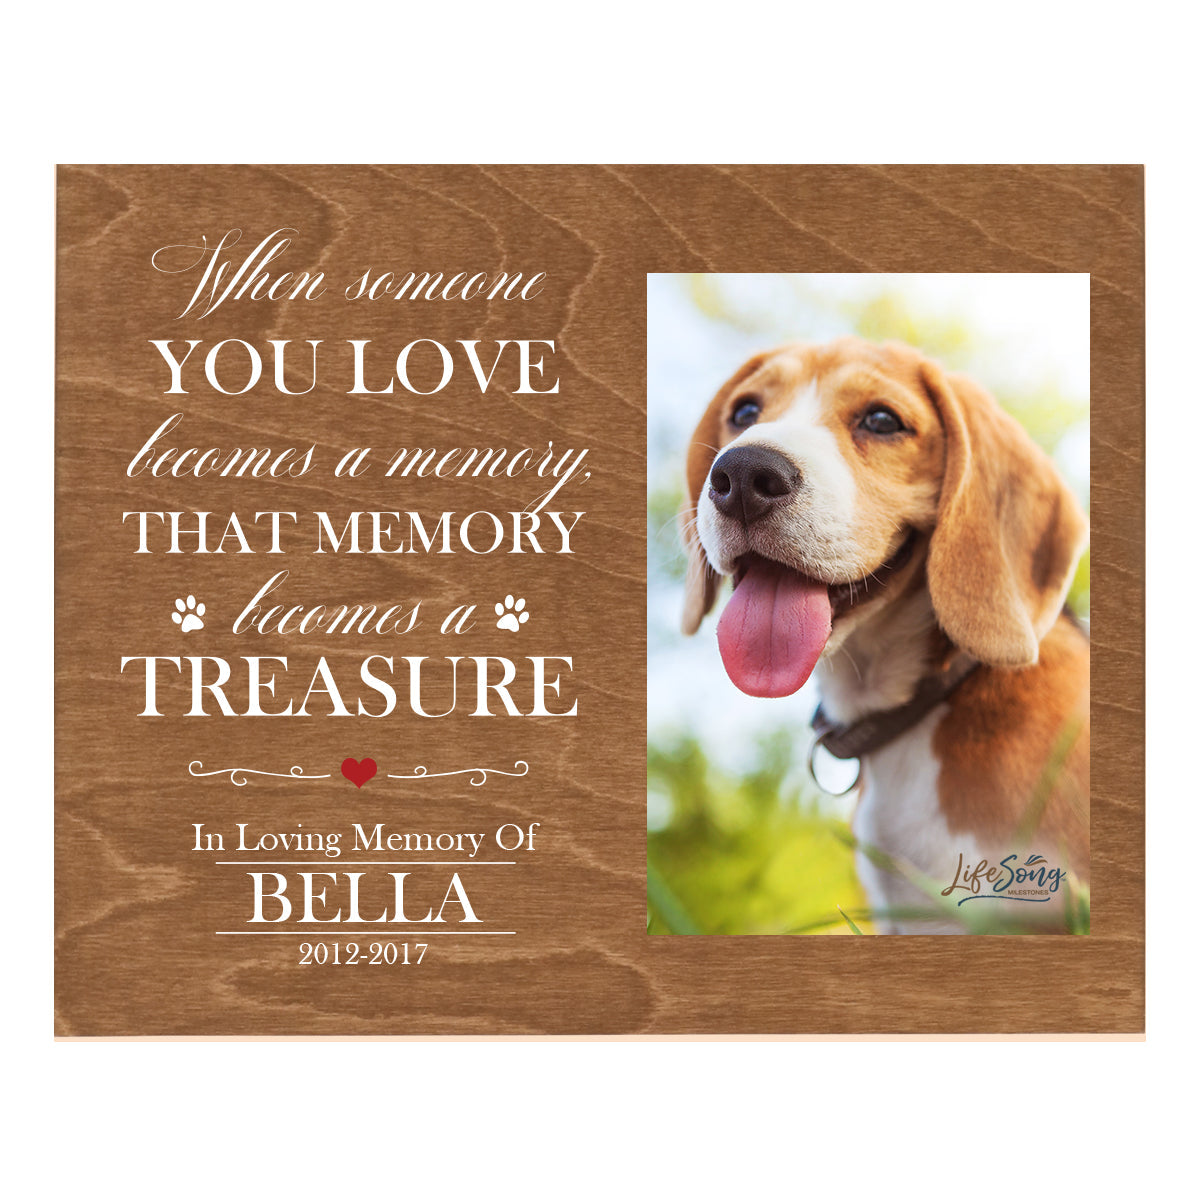 Pet Memorial Photo Wall Plaque Décor - When Someone You Love Becomes A Memory